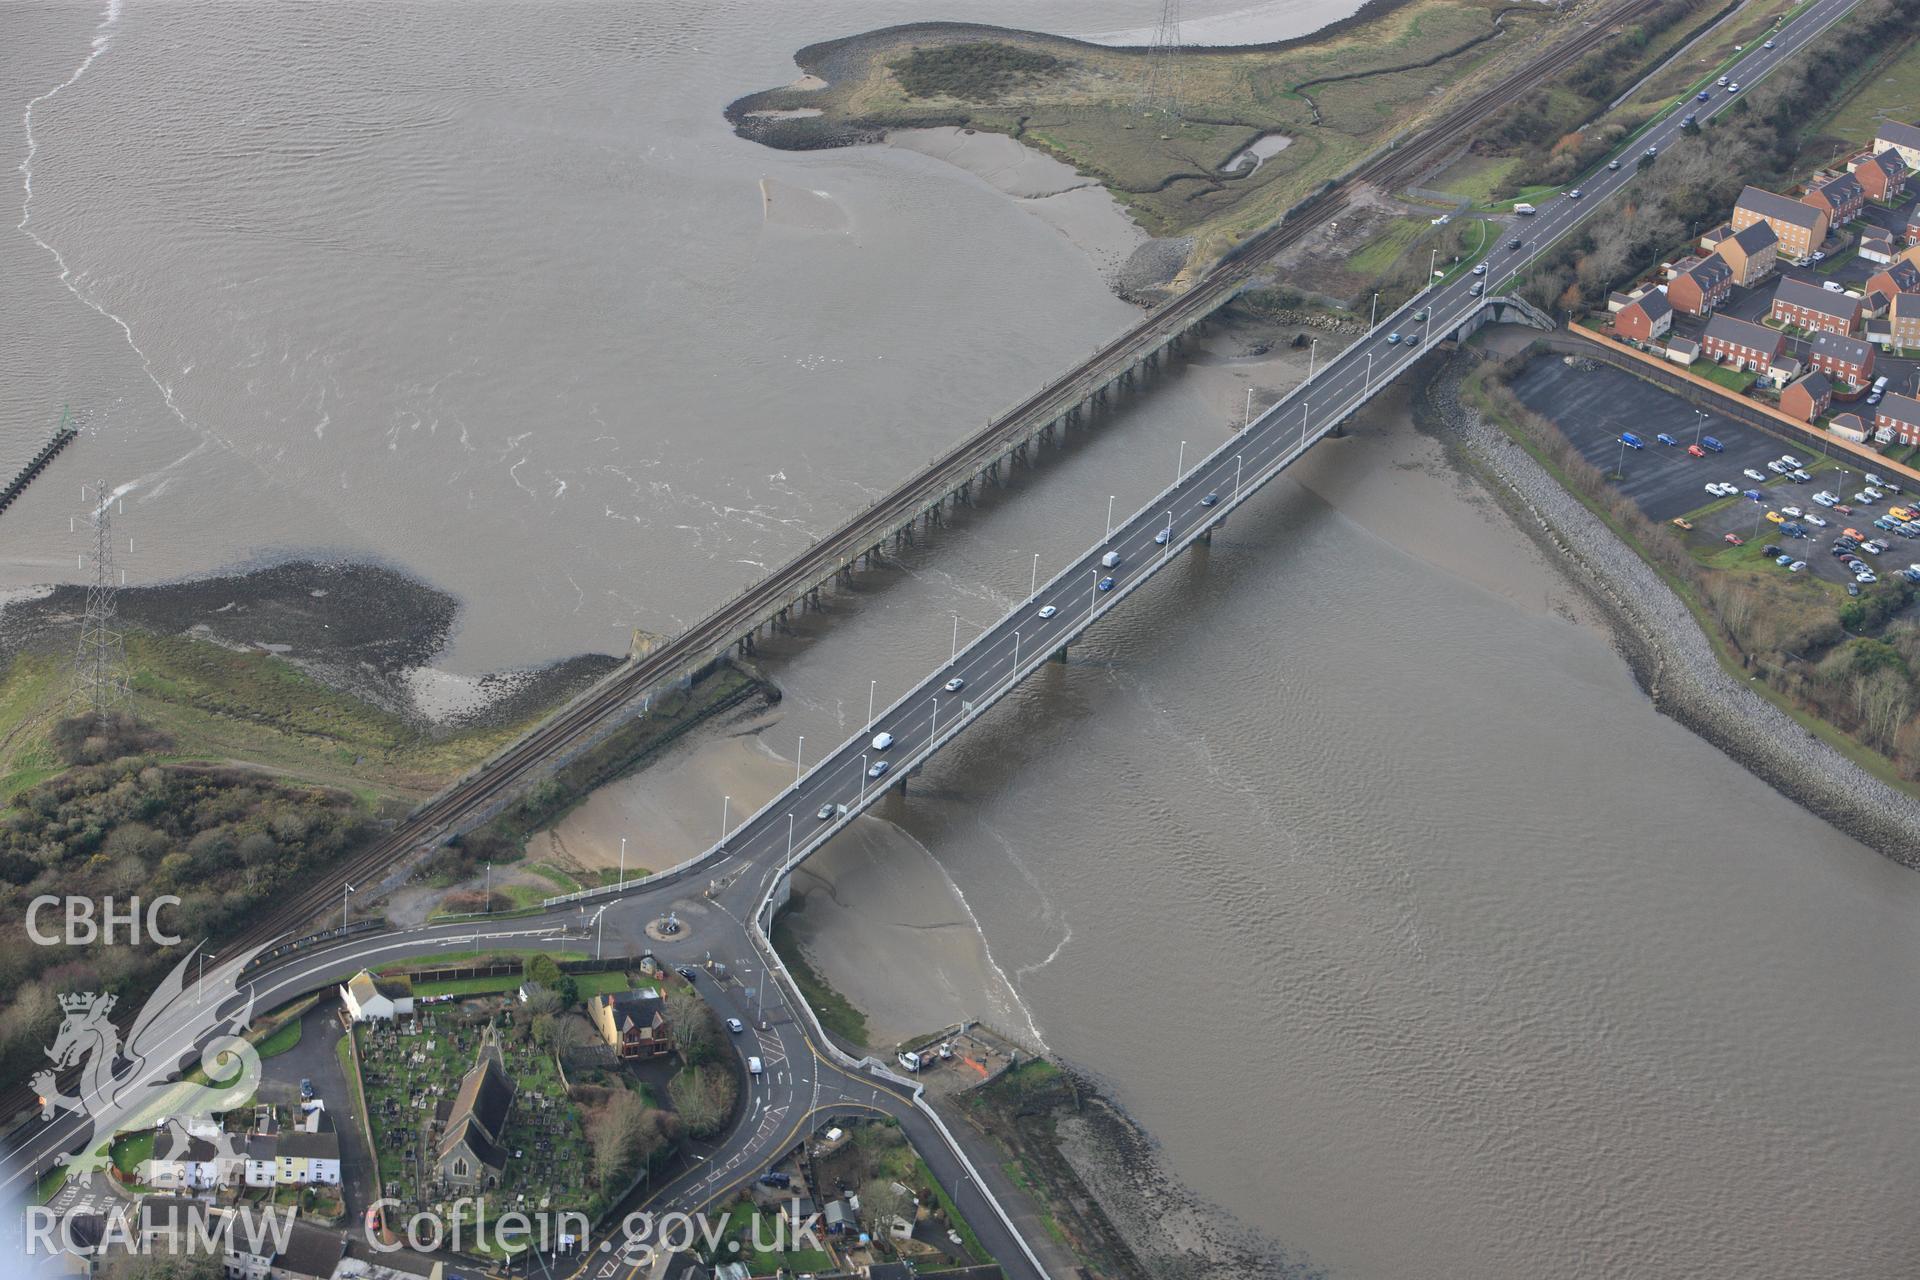 RCAHMW colour oblique photograph of Loughor Railway Viaduct. Taken by Toby Driver on 27/01/2012.